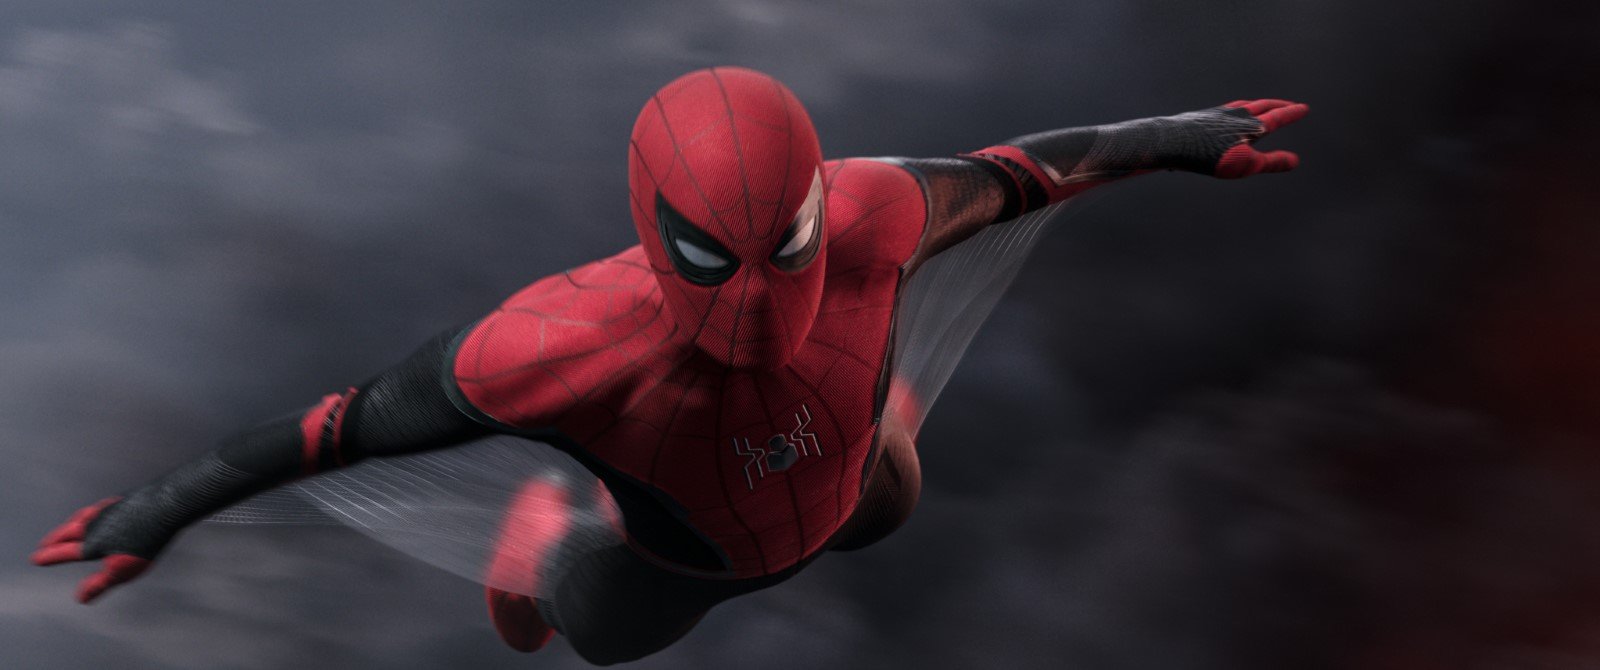 Spider man : Far from home